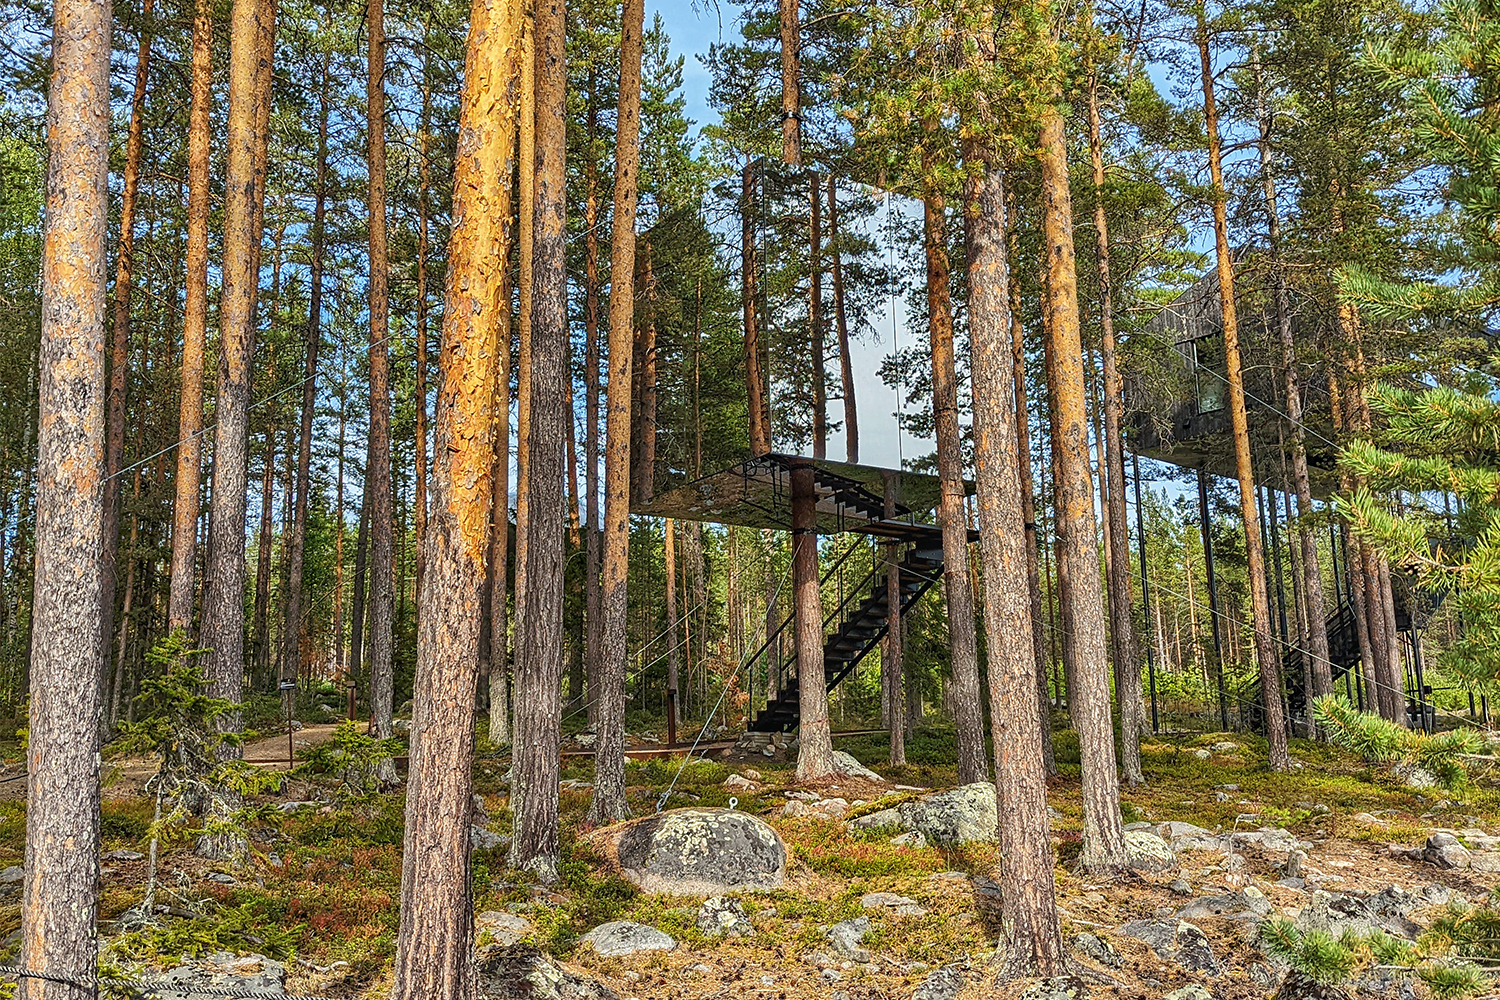 The Mirrorcube, a treehouse room at Sweden's Treehotel